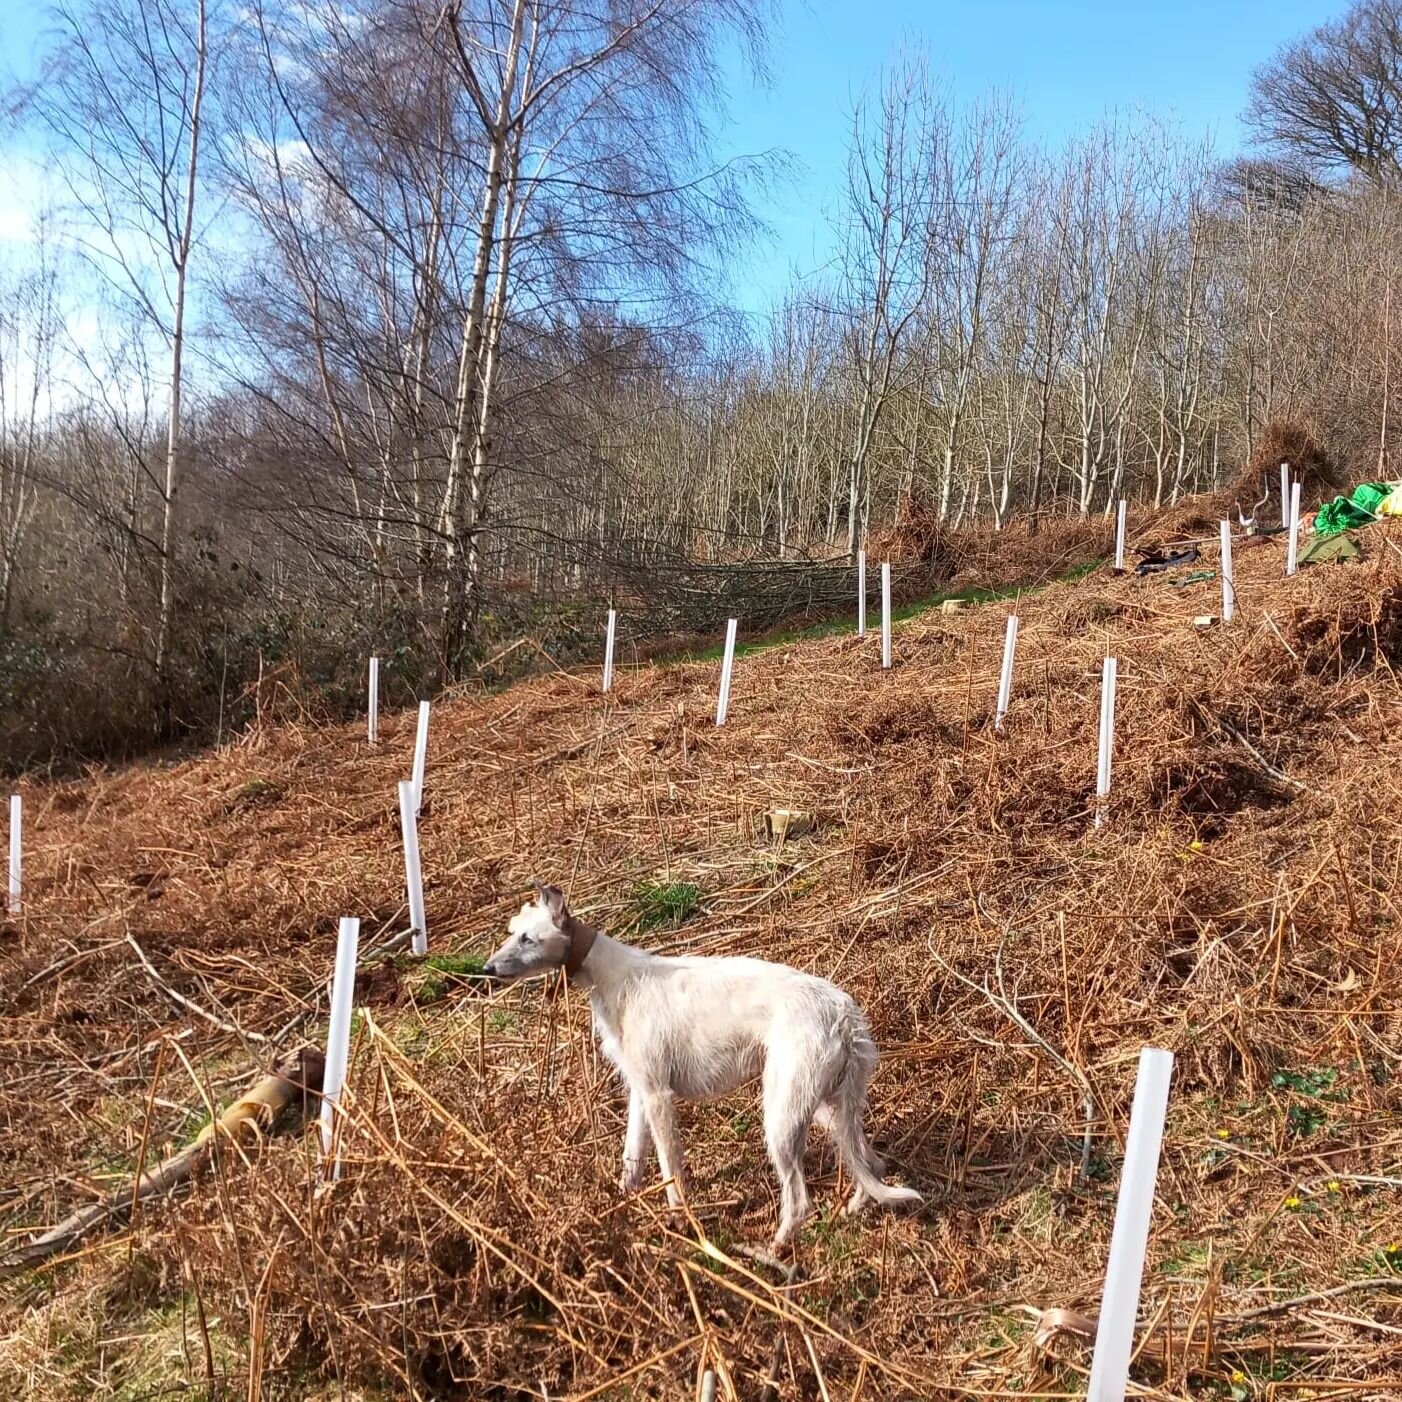 There has been the odd moment of sunshine amongst the rain over the last few days. Juliet has been planting trees in the spaces left when the Ash have come down - 40 oak, 40 sweet chestnut and 20 walnut all grown from seed by her brother James.